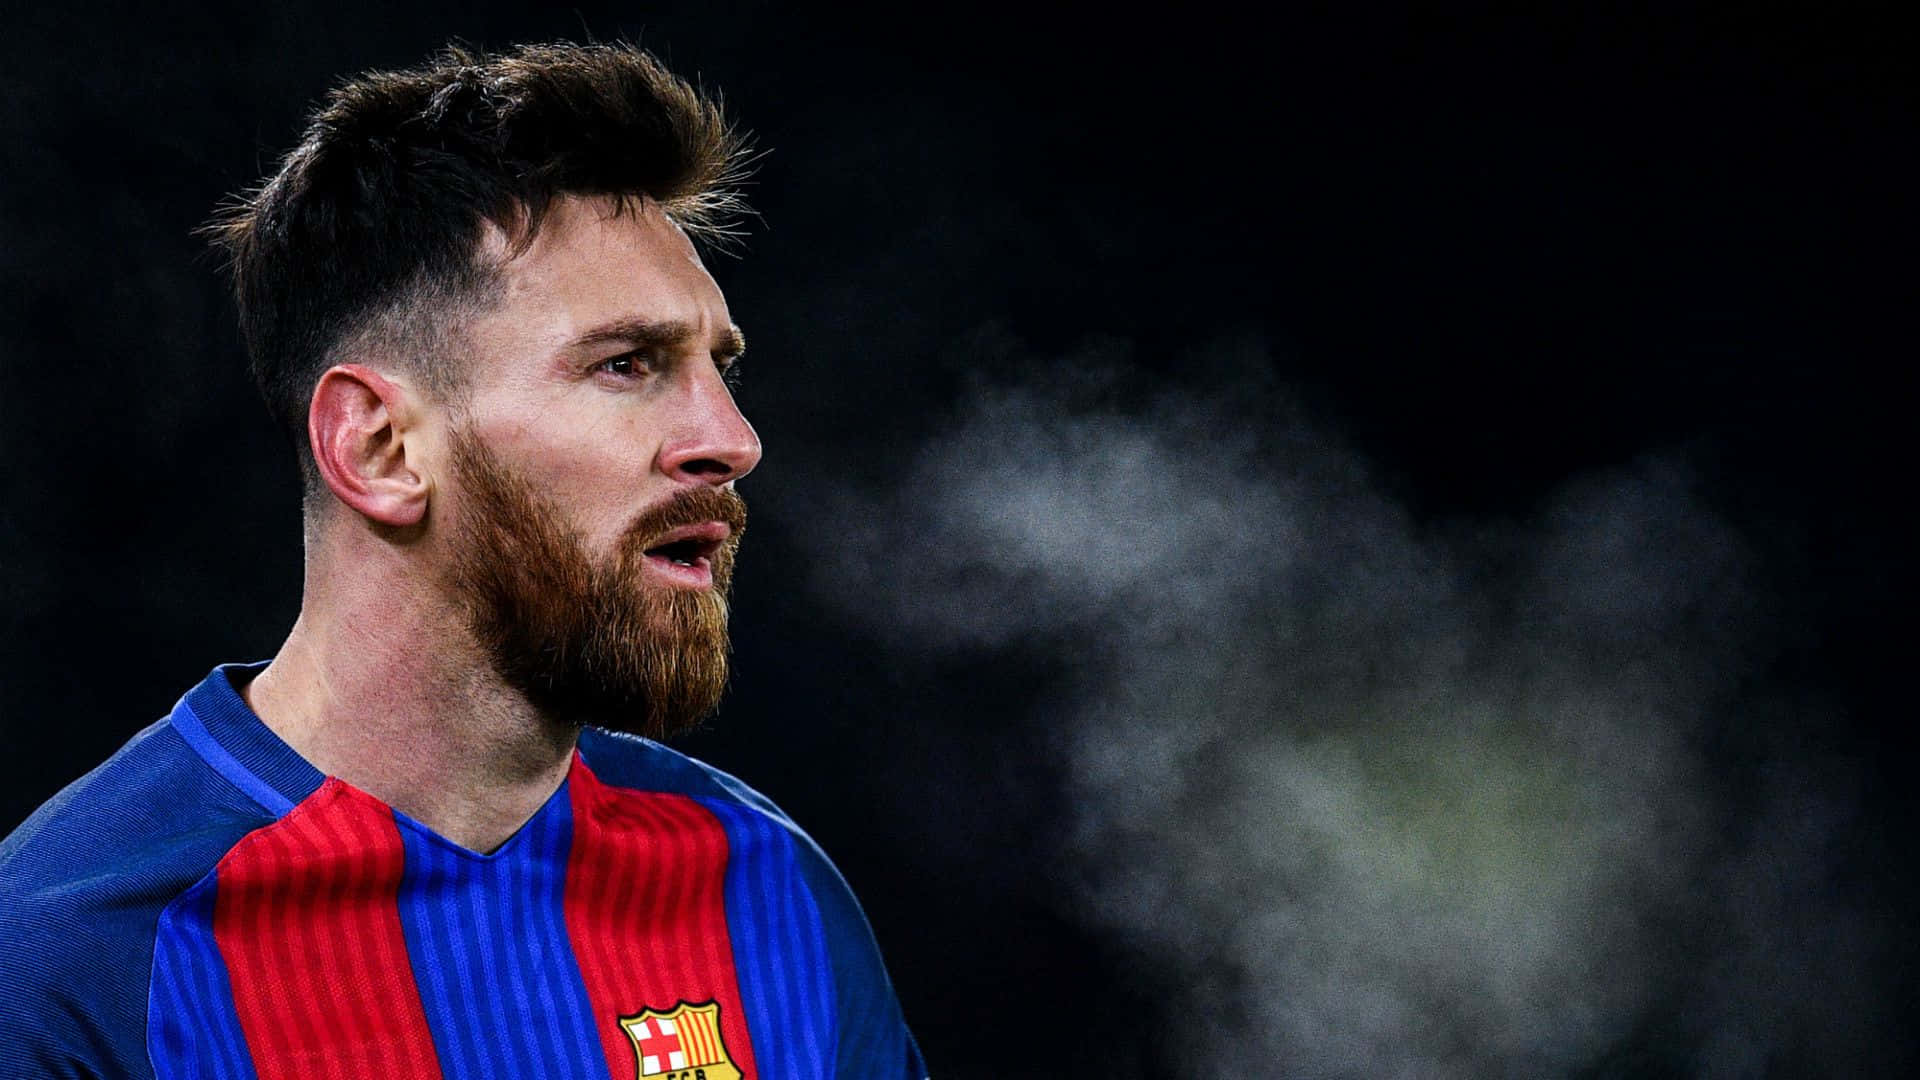 Lionel Messi Is Standing In Front Of Smoke